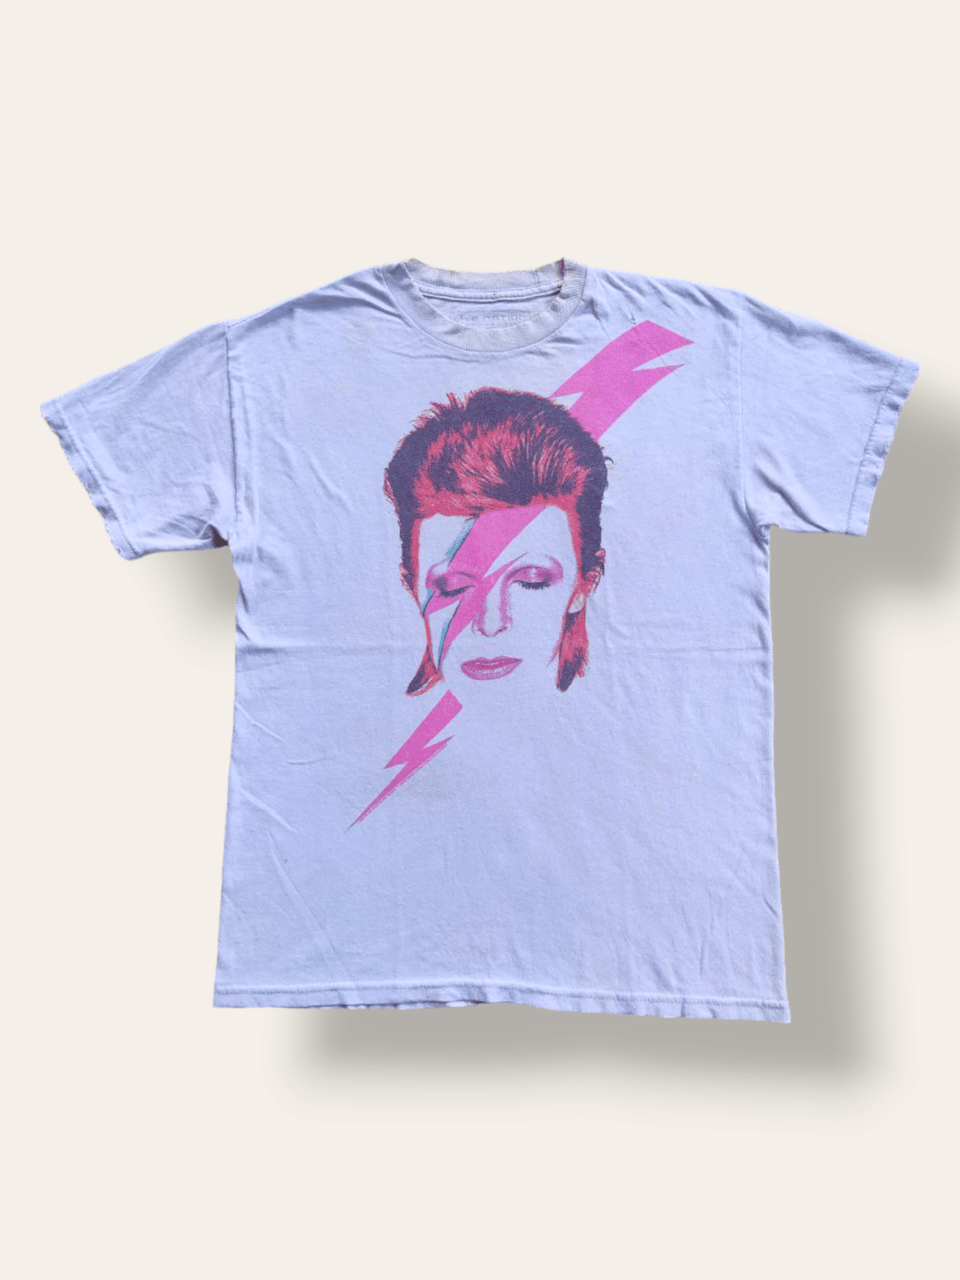 Rock Band - Destroy Brandy Melville David Bowie Band Tee - 1